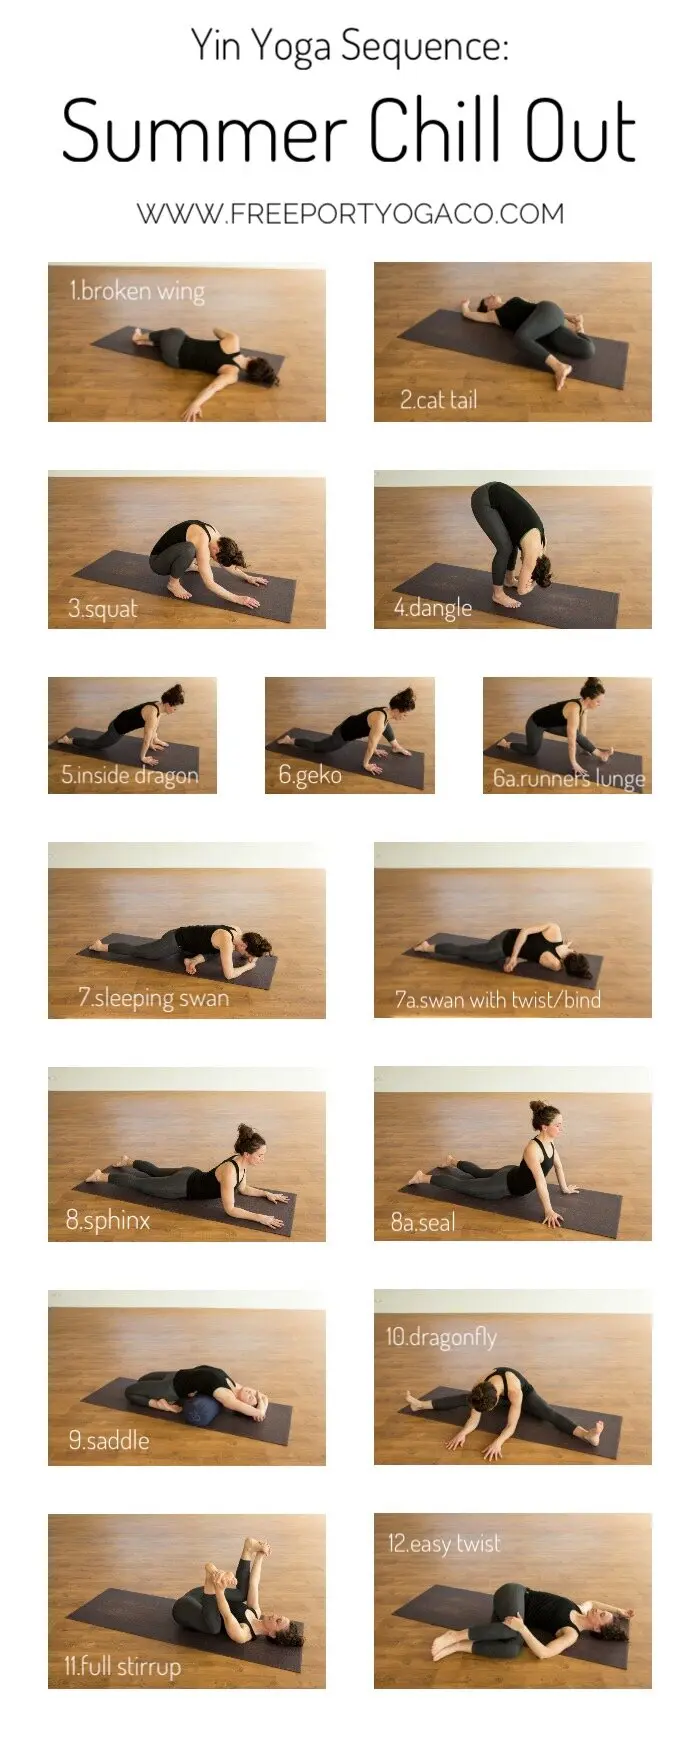 yin yoga poses sequence - What are the 26 Yin Yoga poses with names